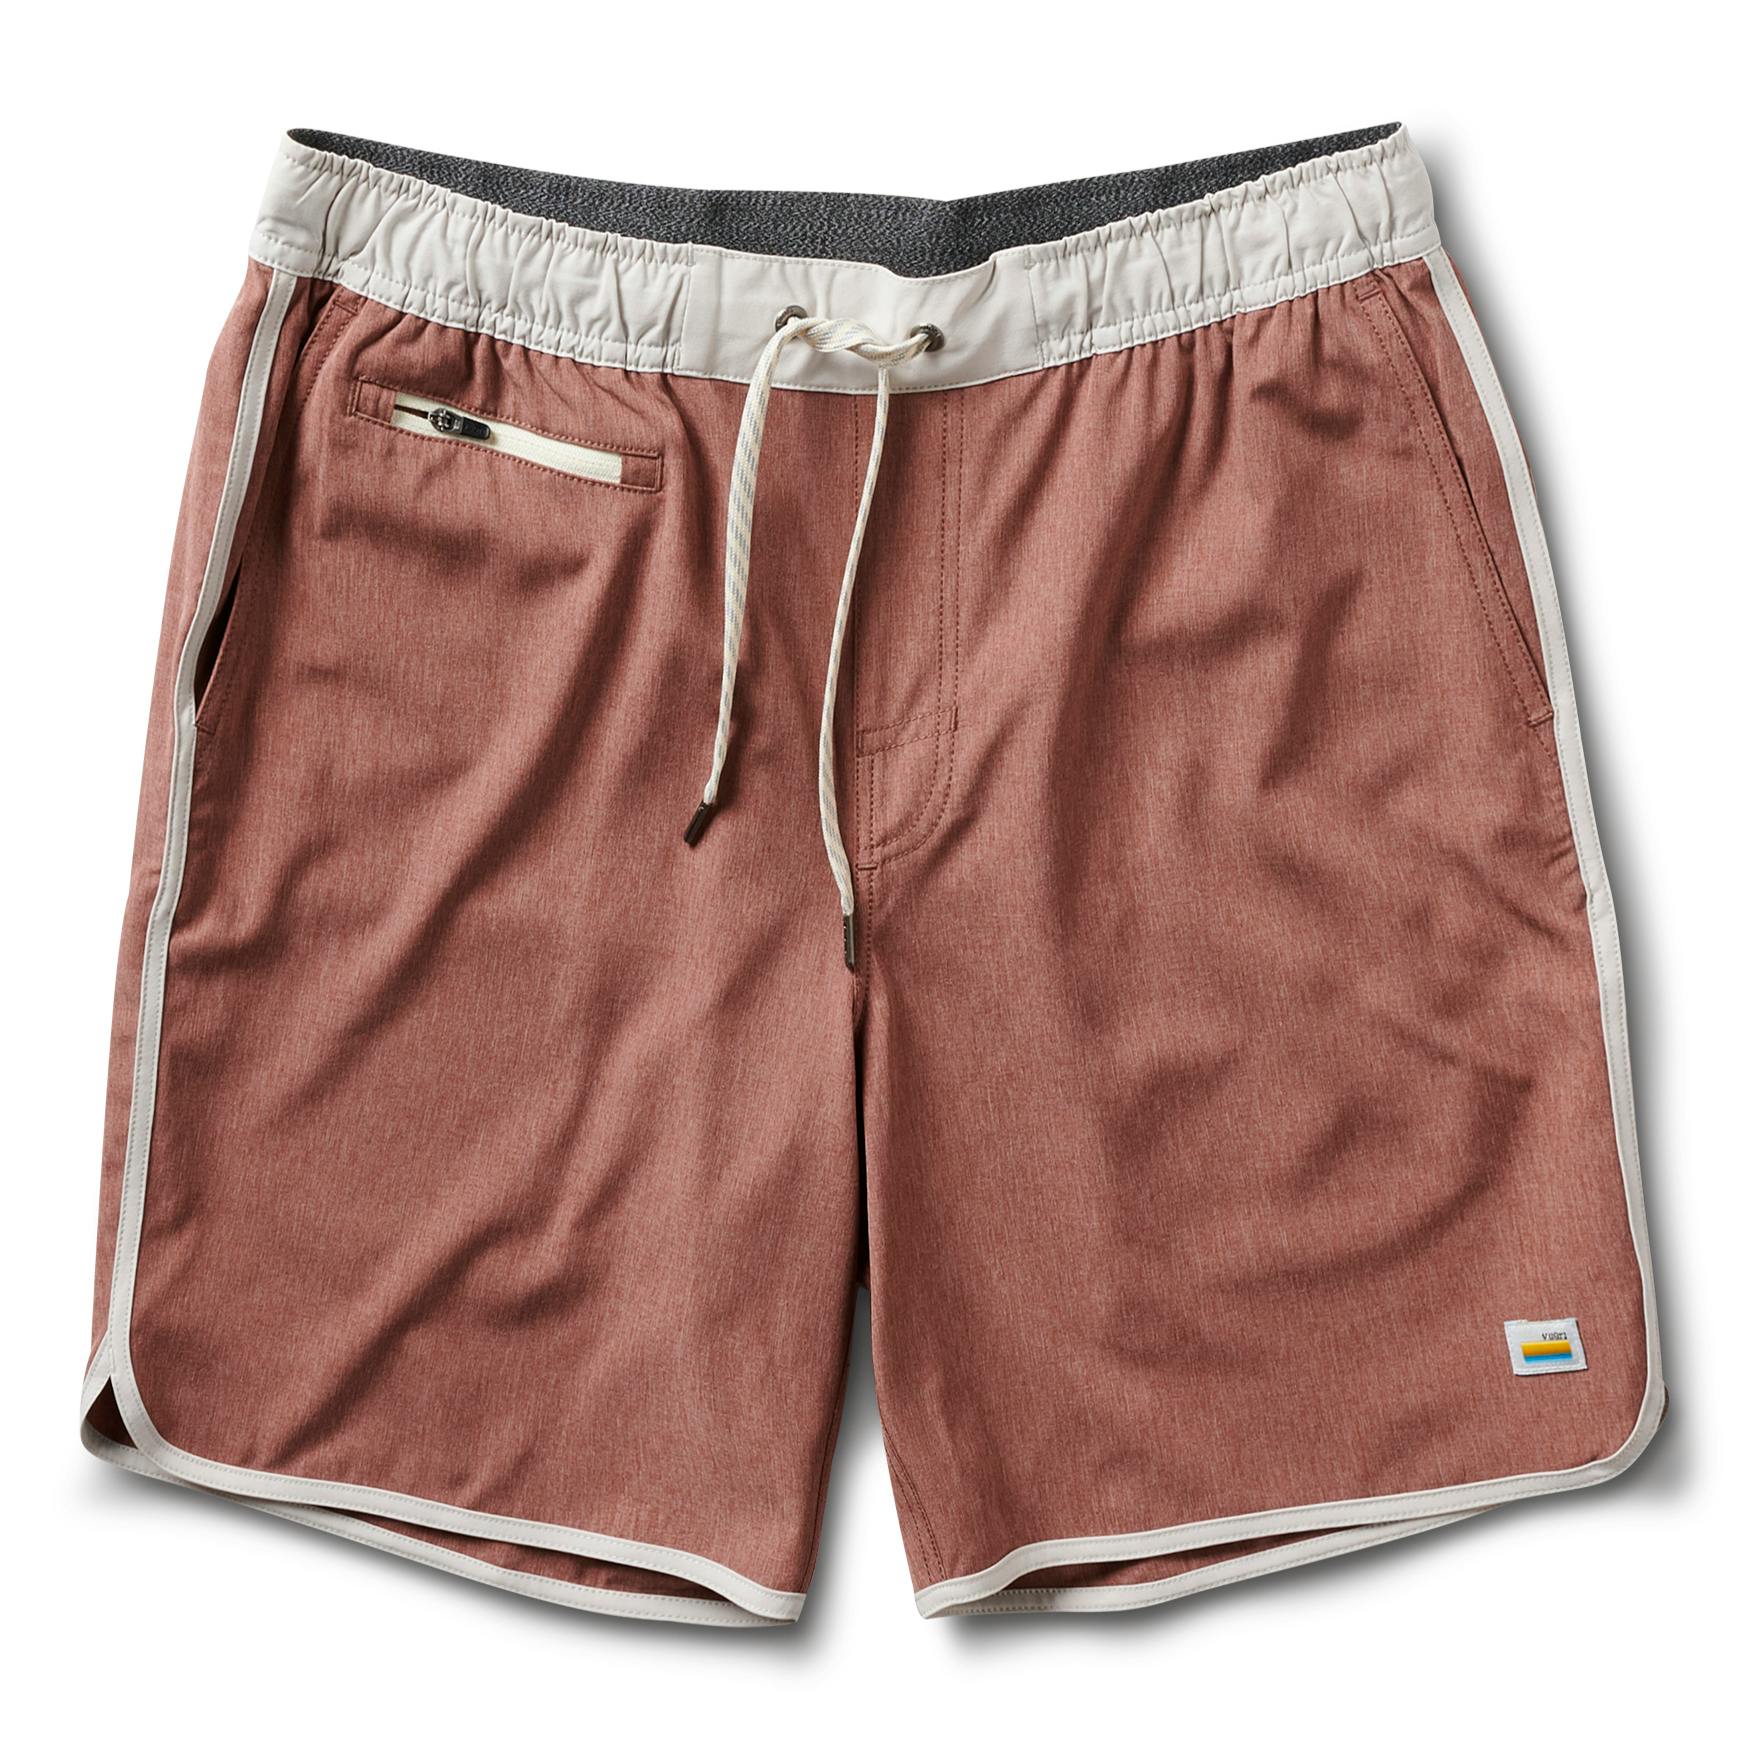 Banks Athletic Short - Unlined 7.5"